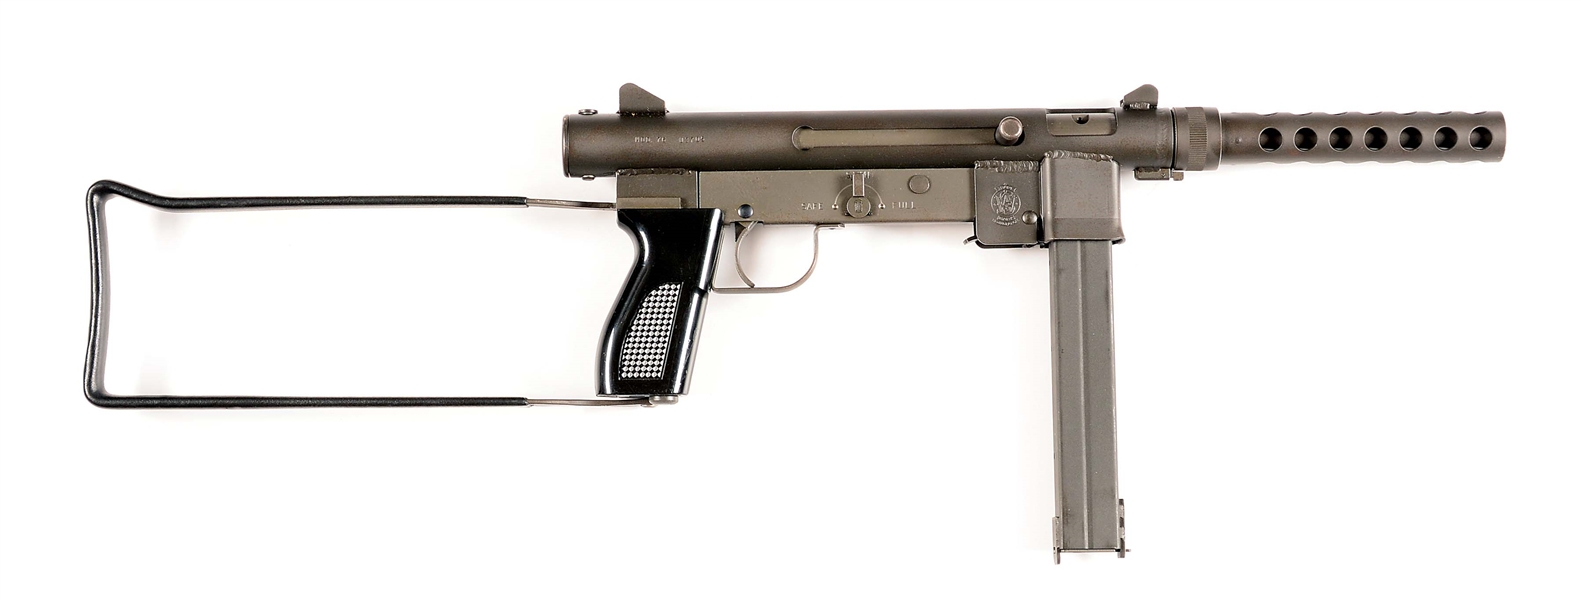 (N) SMITH & WESSON MODEL 76 SELECT FIRE MACHINE GUN (FULLY TRANSFERABLE).